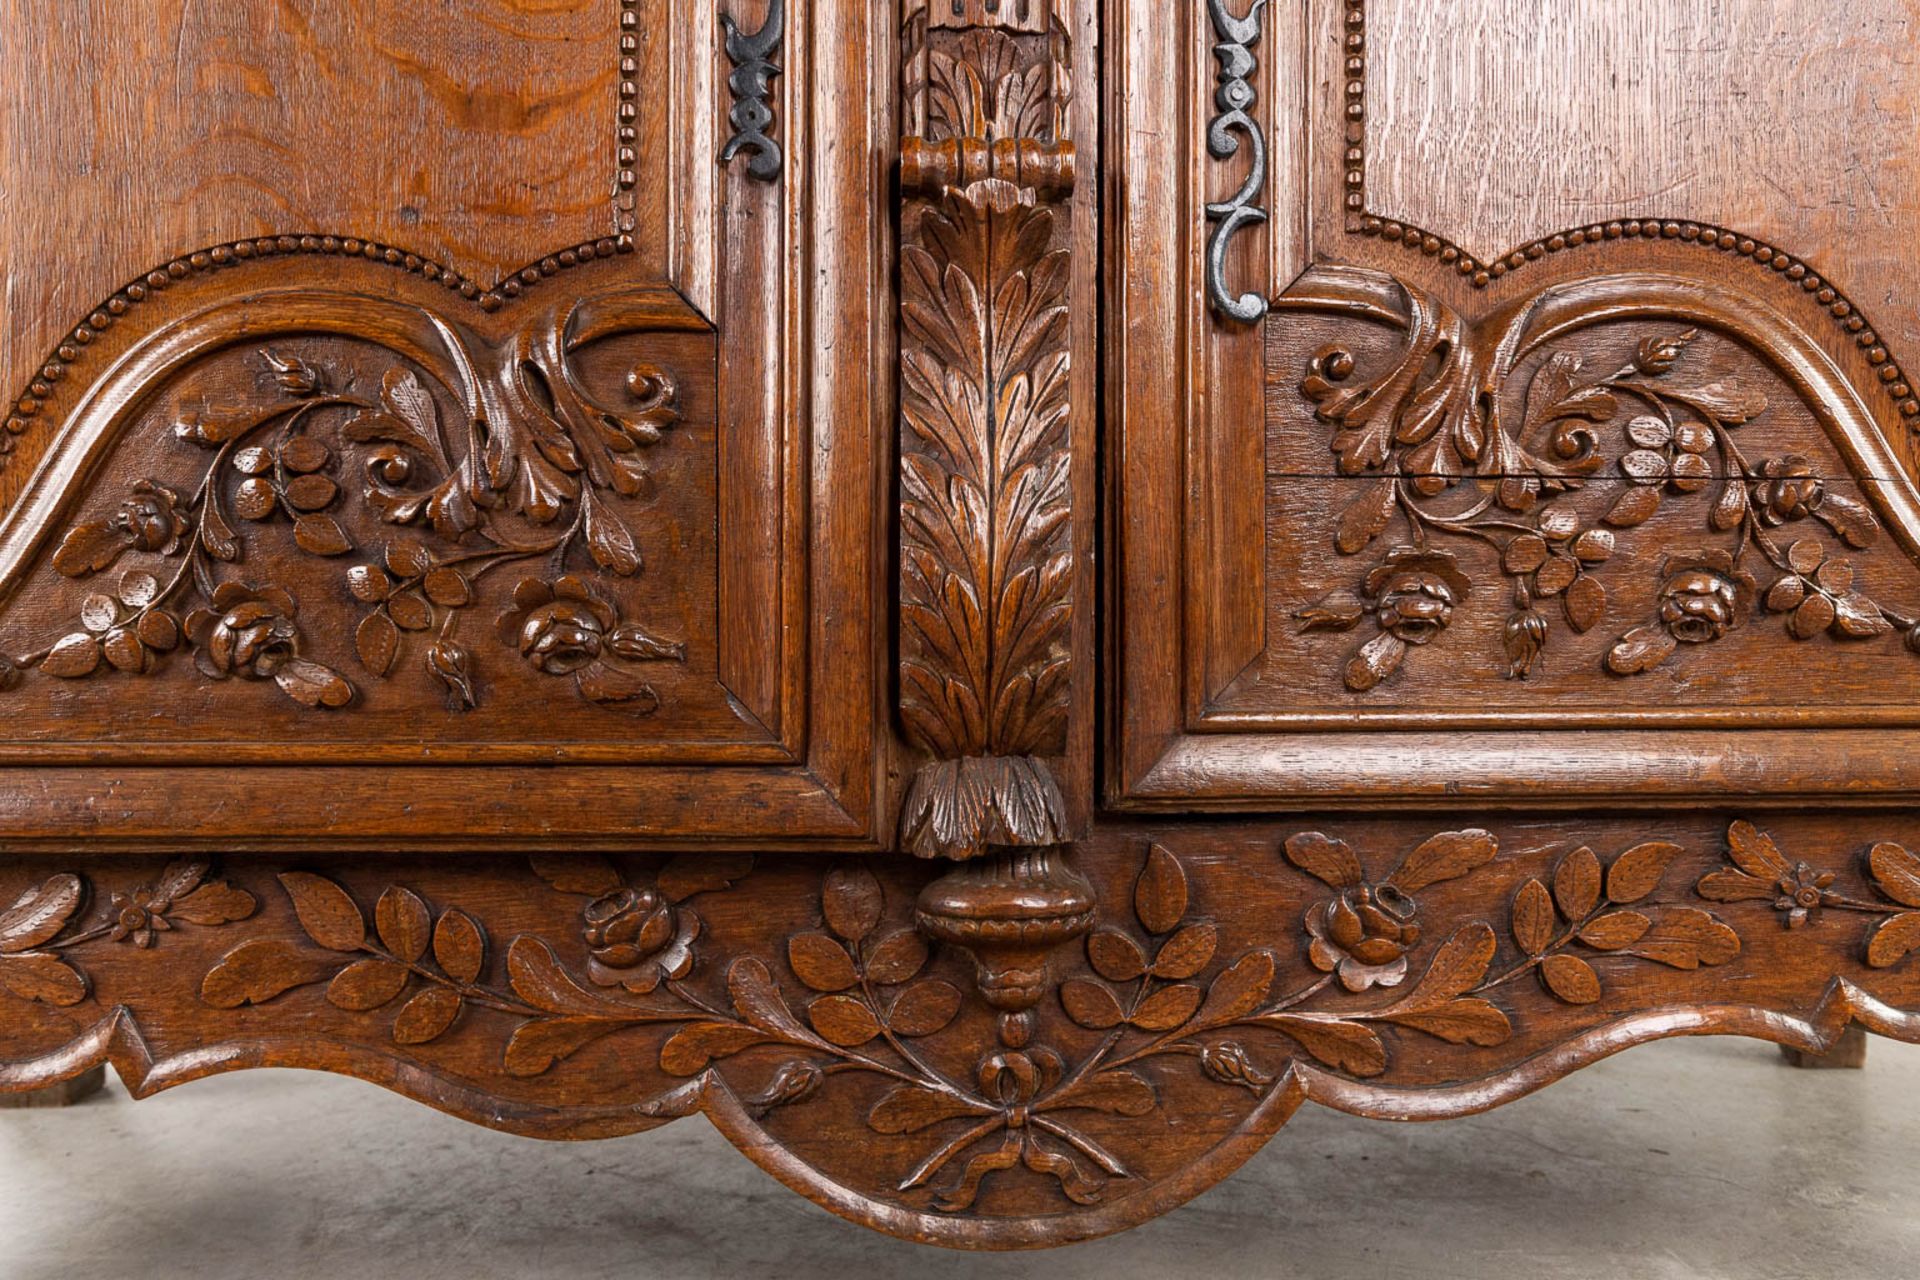 A richly sculptured and antique Normandy high cabinet, Armoire. France, 18th C. (D:68 x W:175 x H:23 - Image 5 of 21